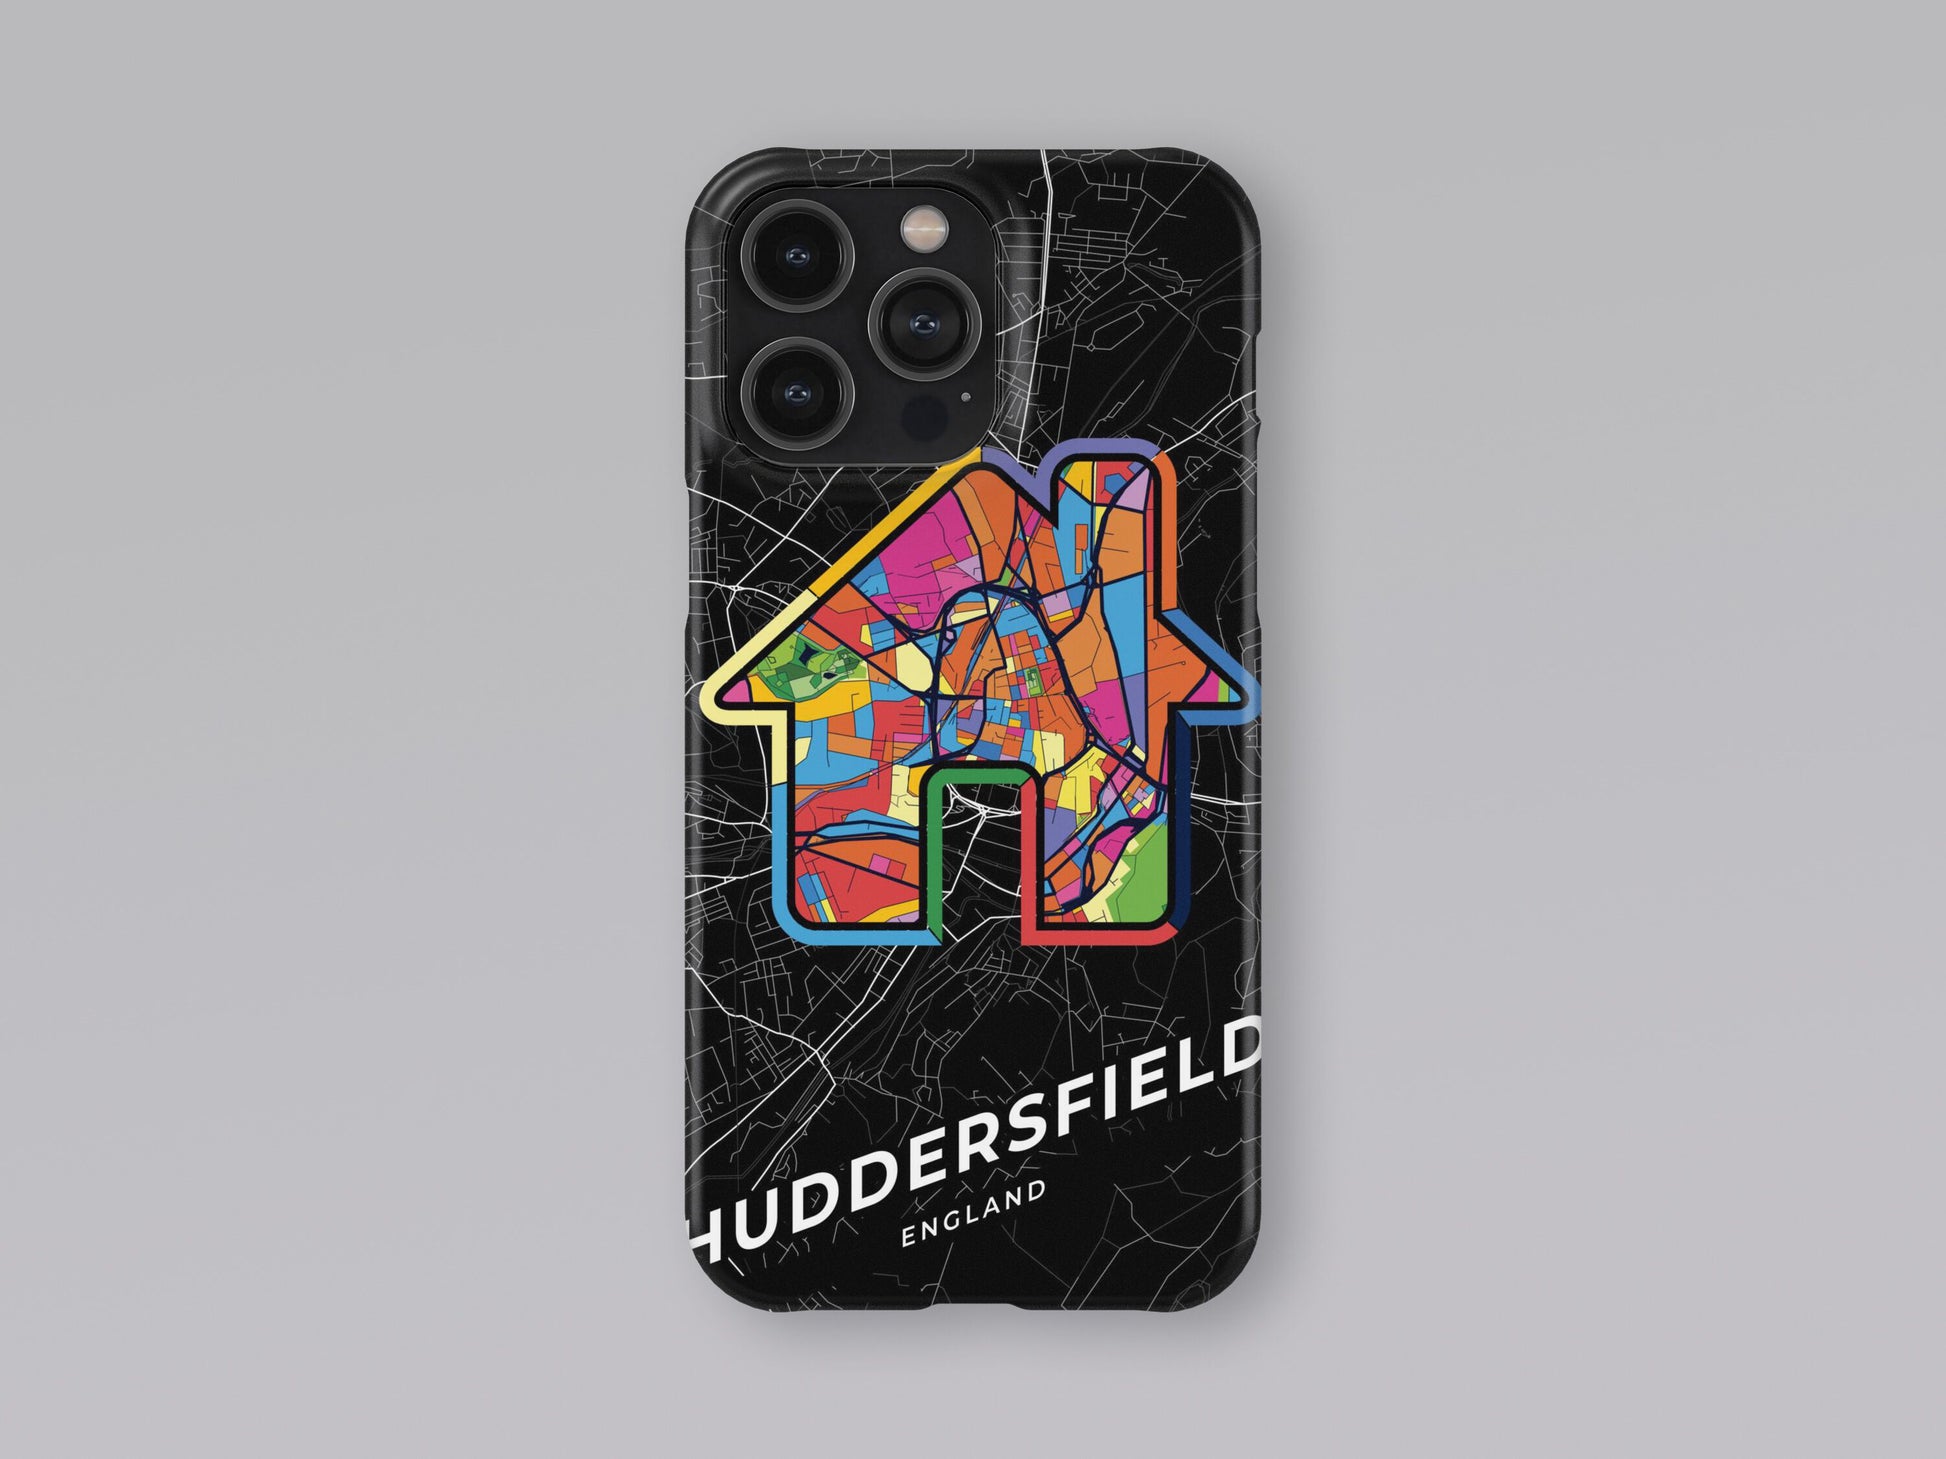 Huddersfield England slim phone case with colorful icon. Birthday, wedding or housewarming gift. Couple match cases. 3